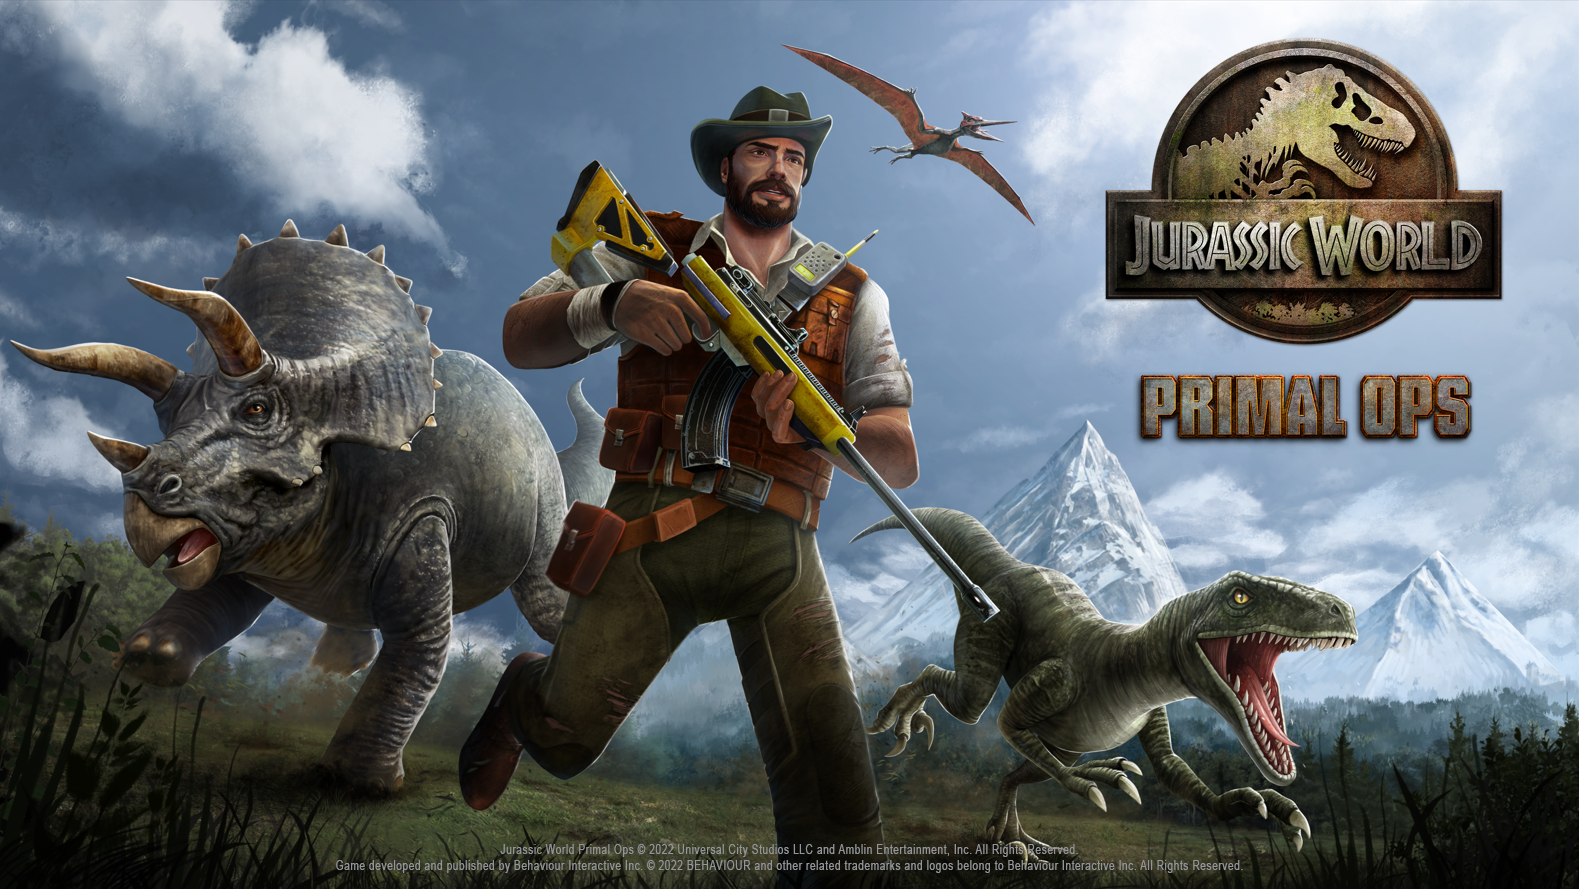 JURASSIC World: PRIMAL Ops - LETS YOU JOIN UP WITH A TREX